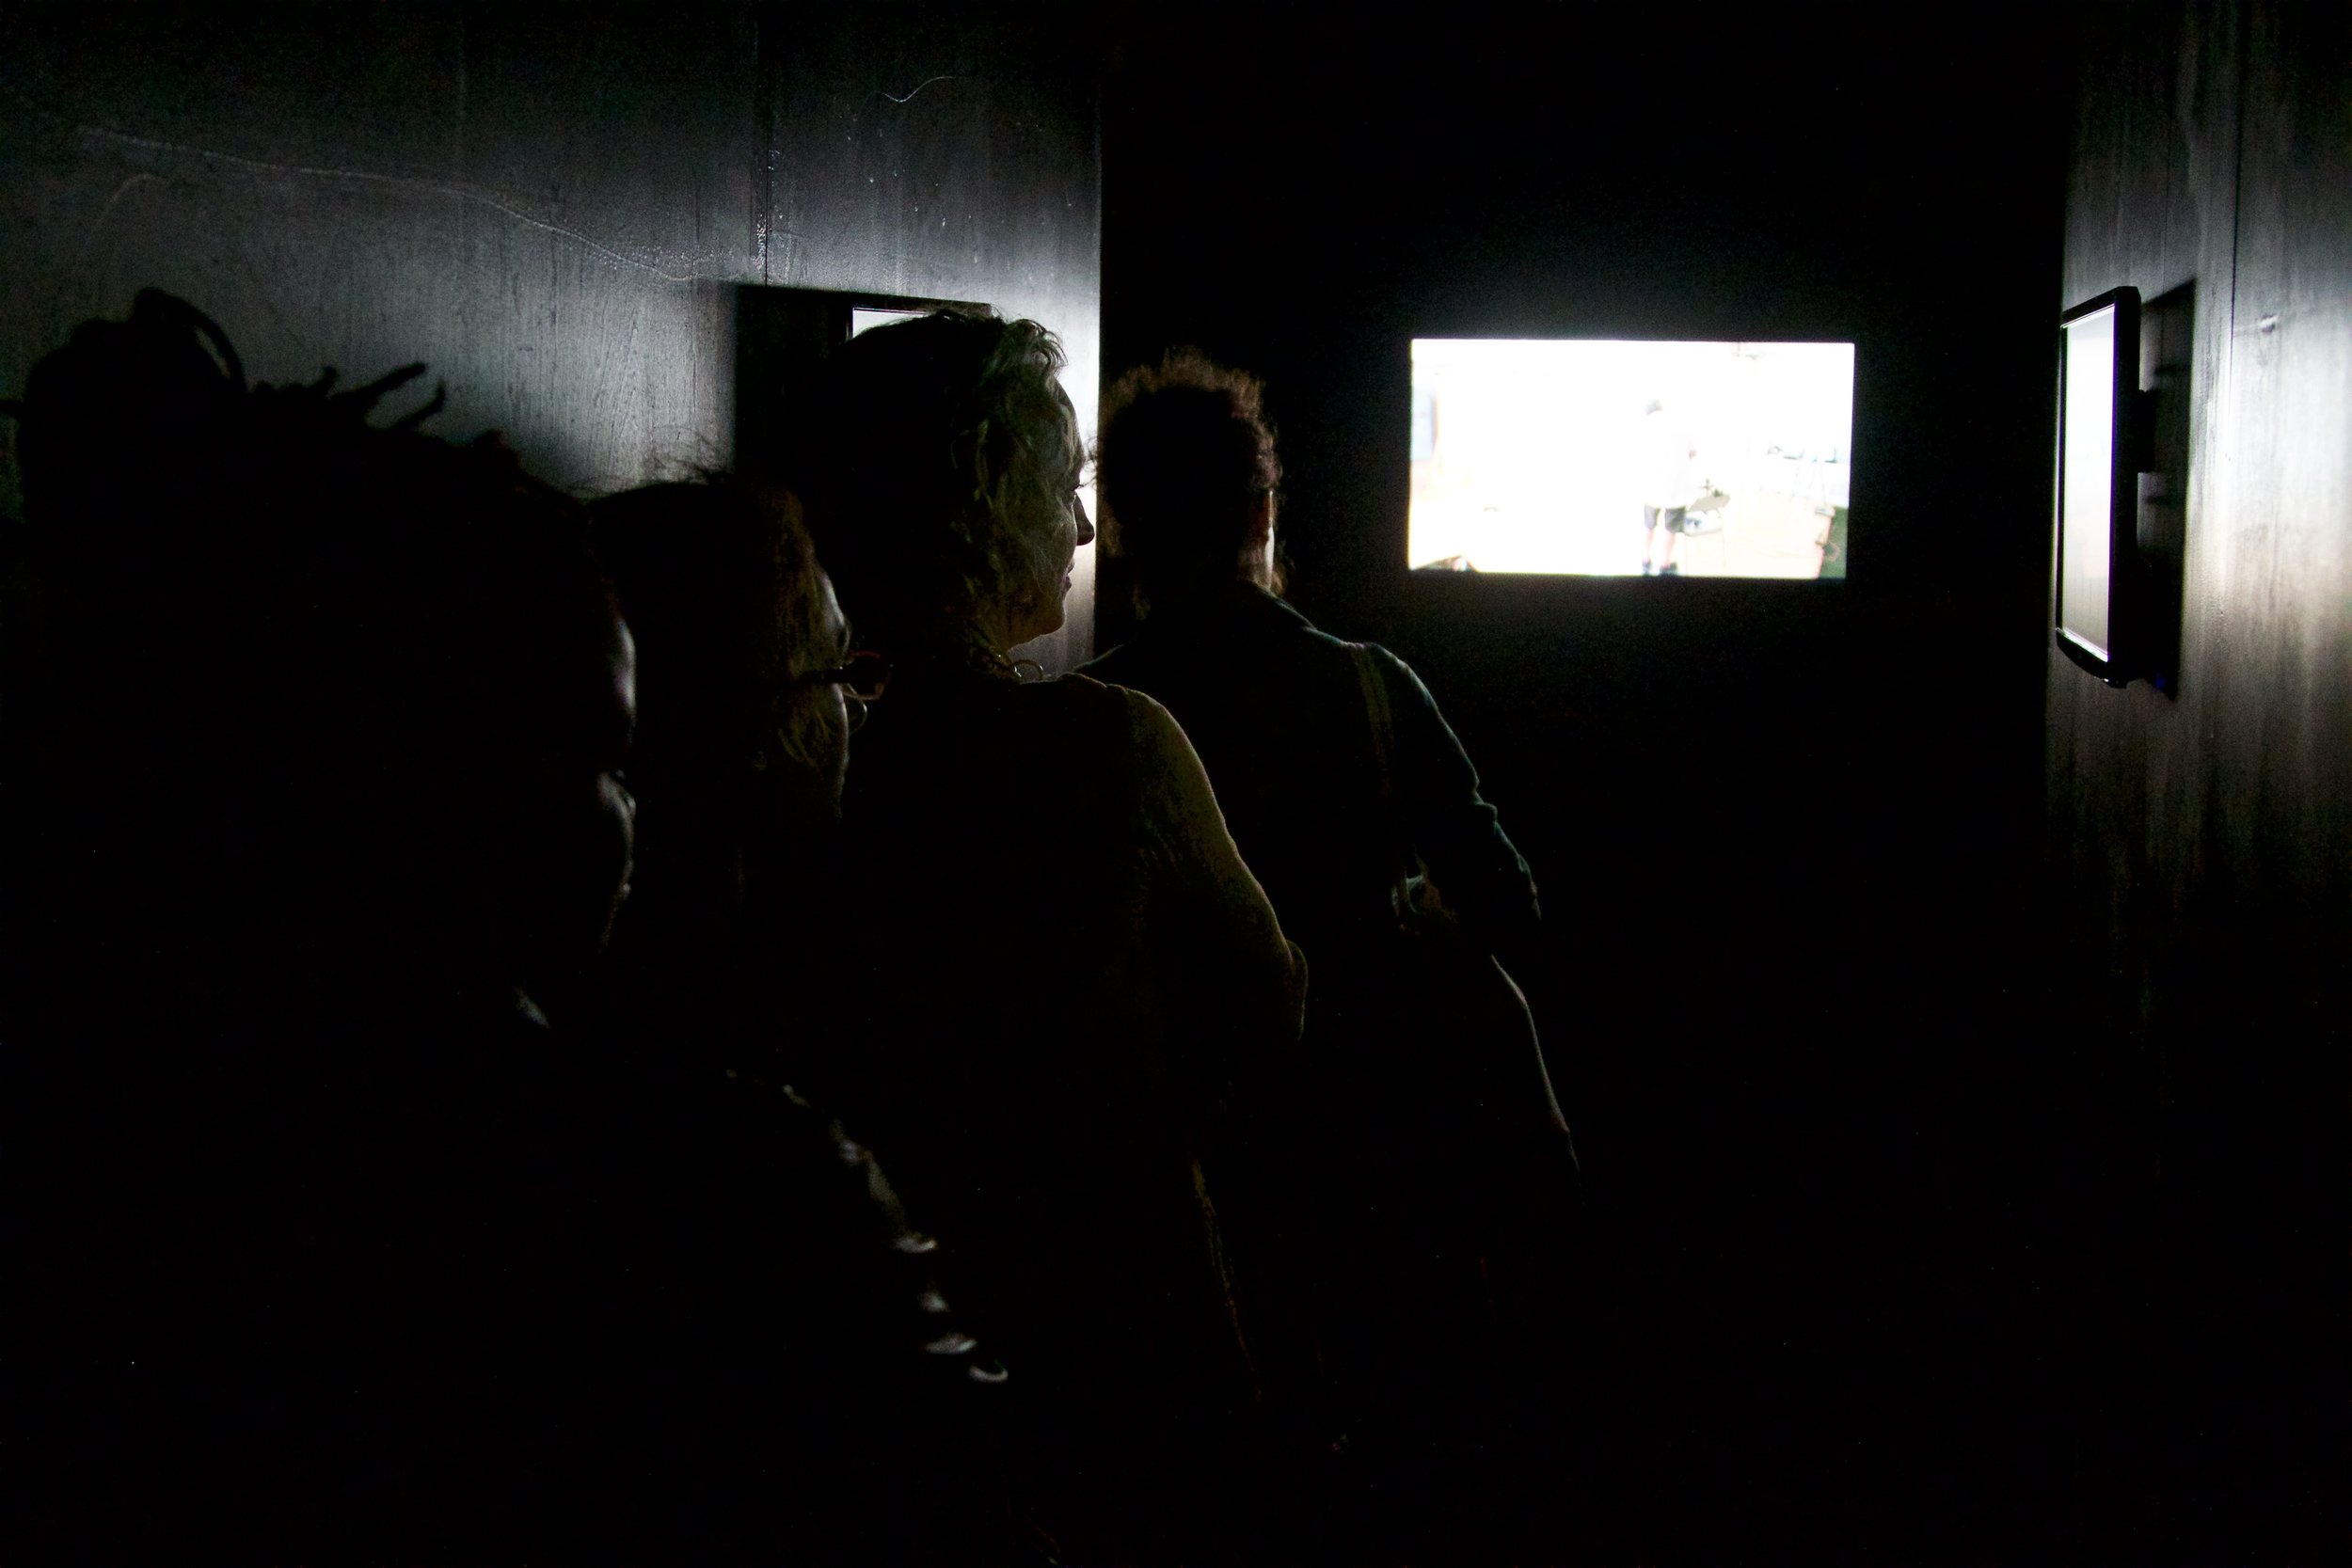 A line of people lean on a wall viewing various screens mounted on the walls of a dark, narrow hallway. Photo by Simon Courchel.